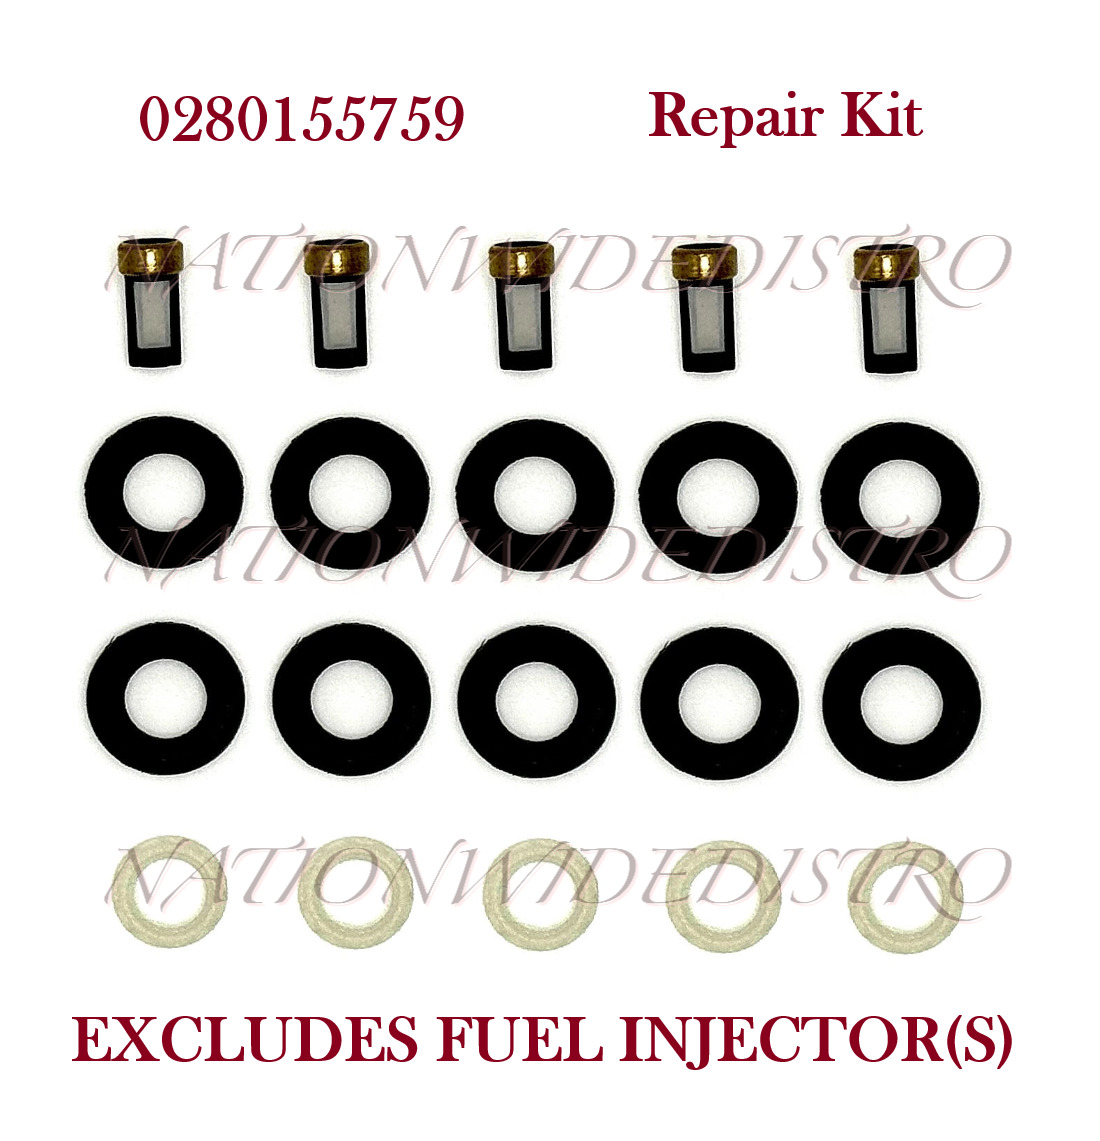 Repair Kit for Fuel Injectors for 96-98 Volvo S70 V70 2.4 850 2.3L I5 0280155759